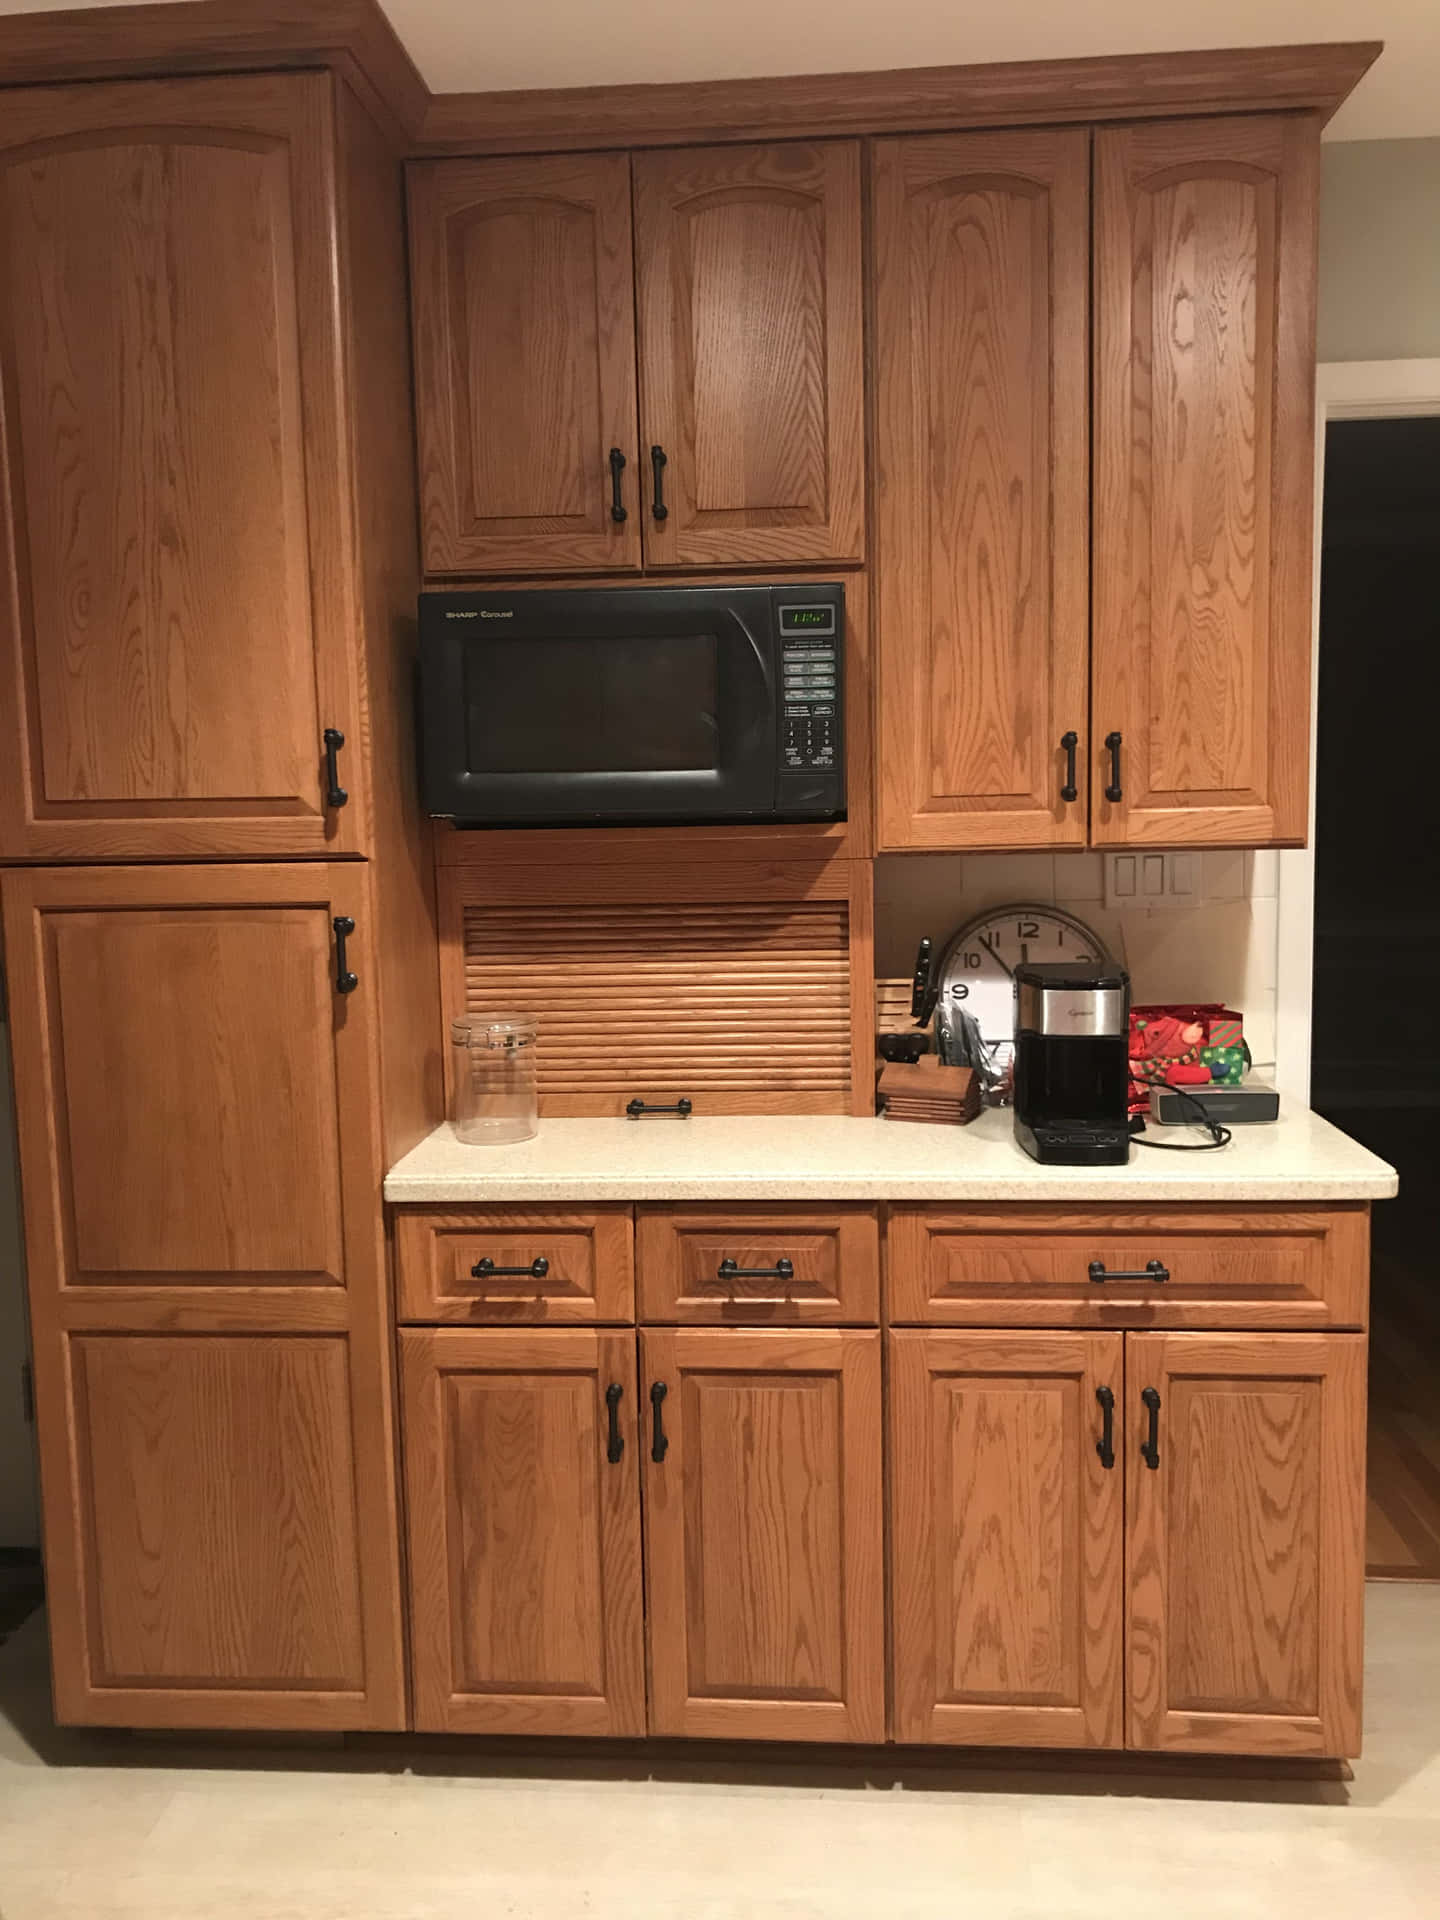 A Kitchen With Wood Cabinets And A Microwave